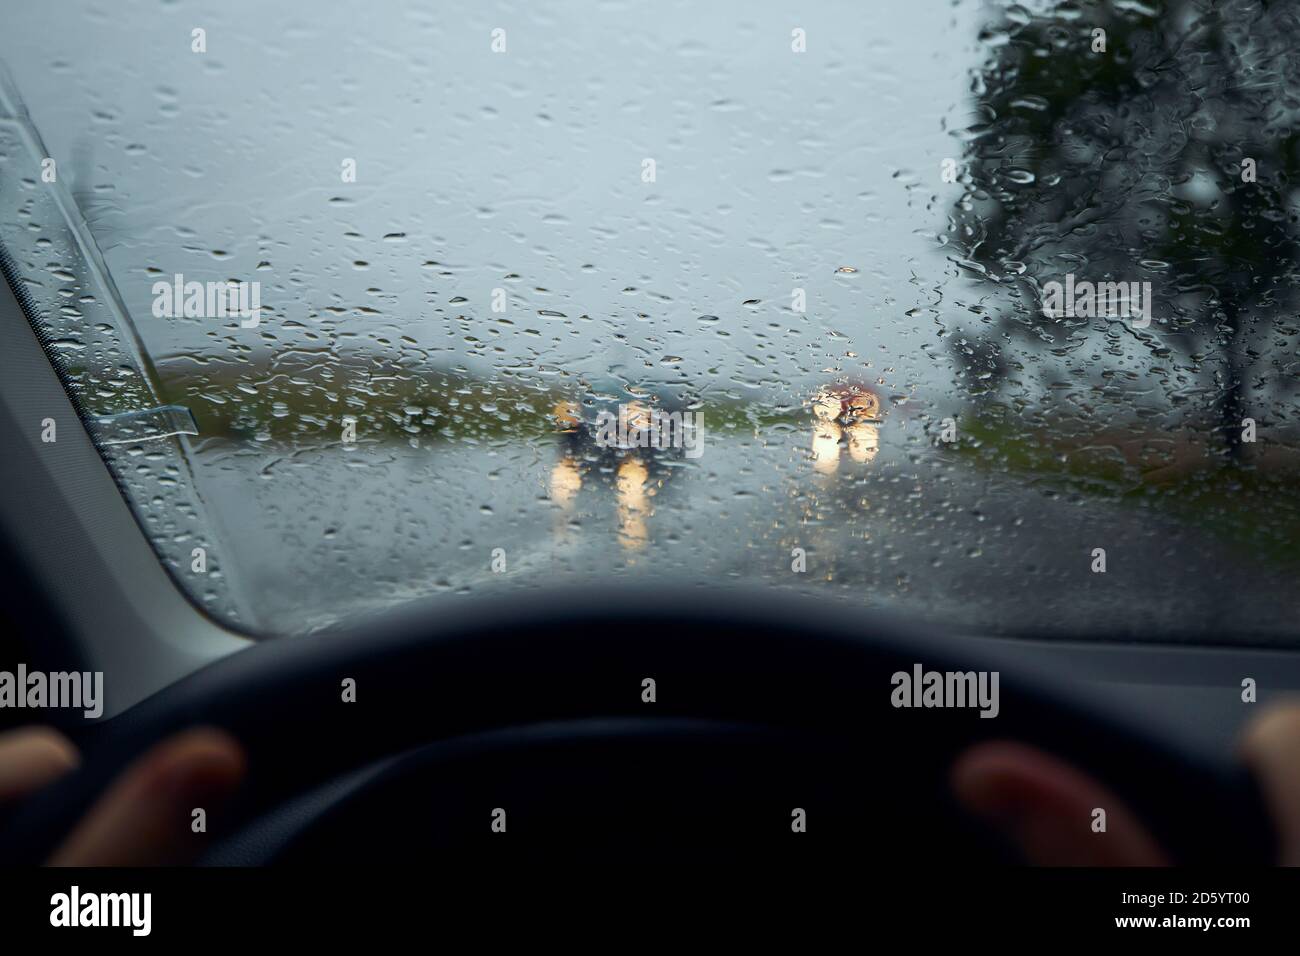 Driving in heavy rain. Raindrops on windshield of car against traffic in crossroad. Stock Photo